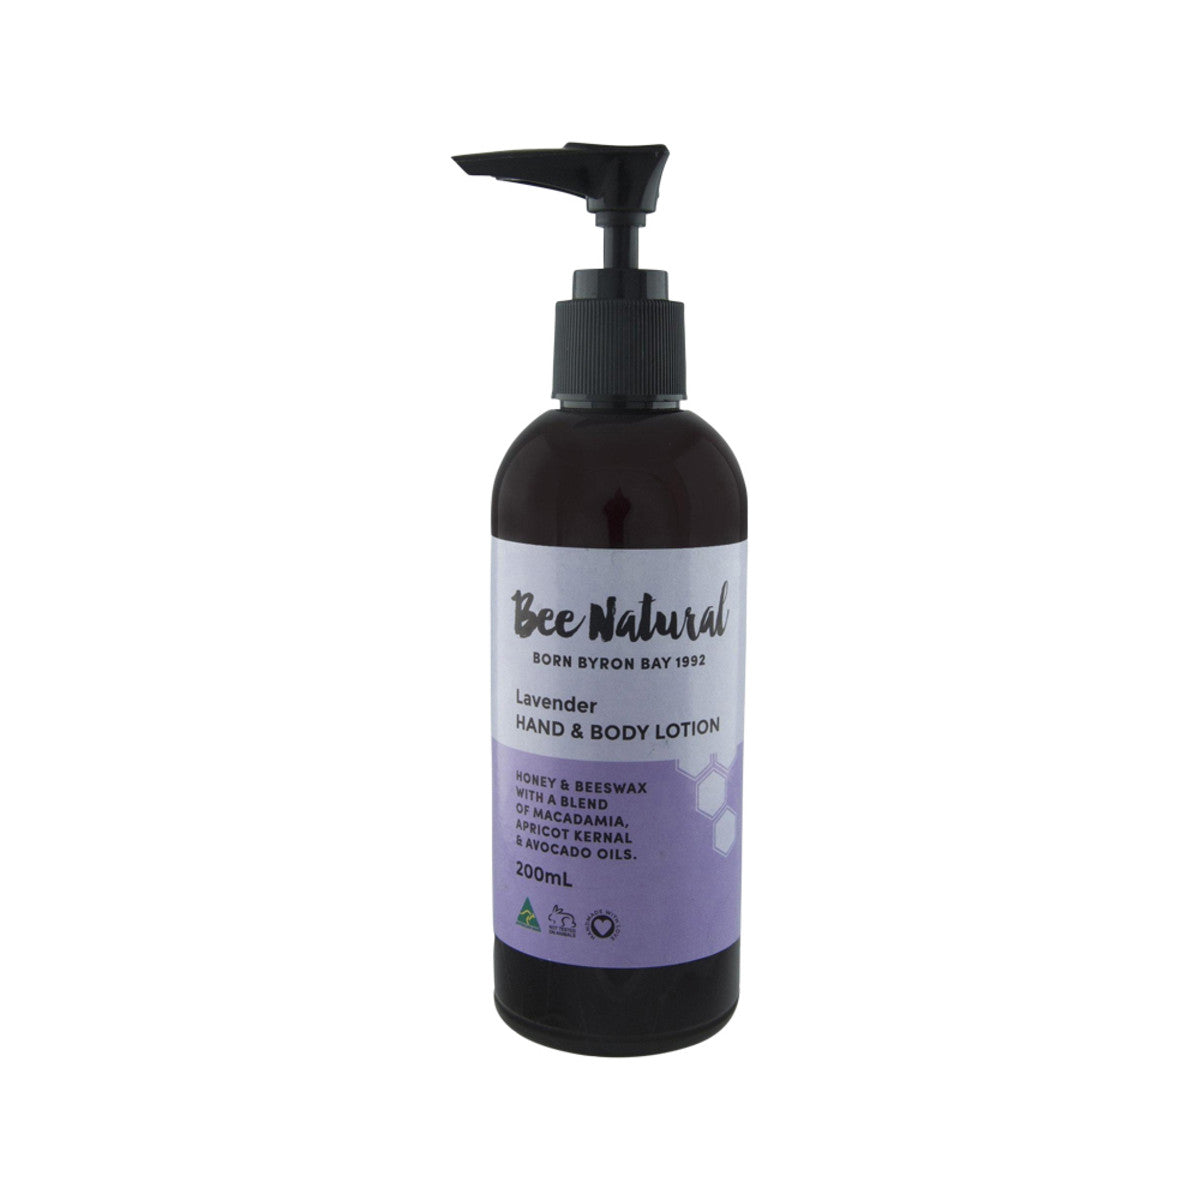 Bee Natural - Hand and Body Lotion Lavender